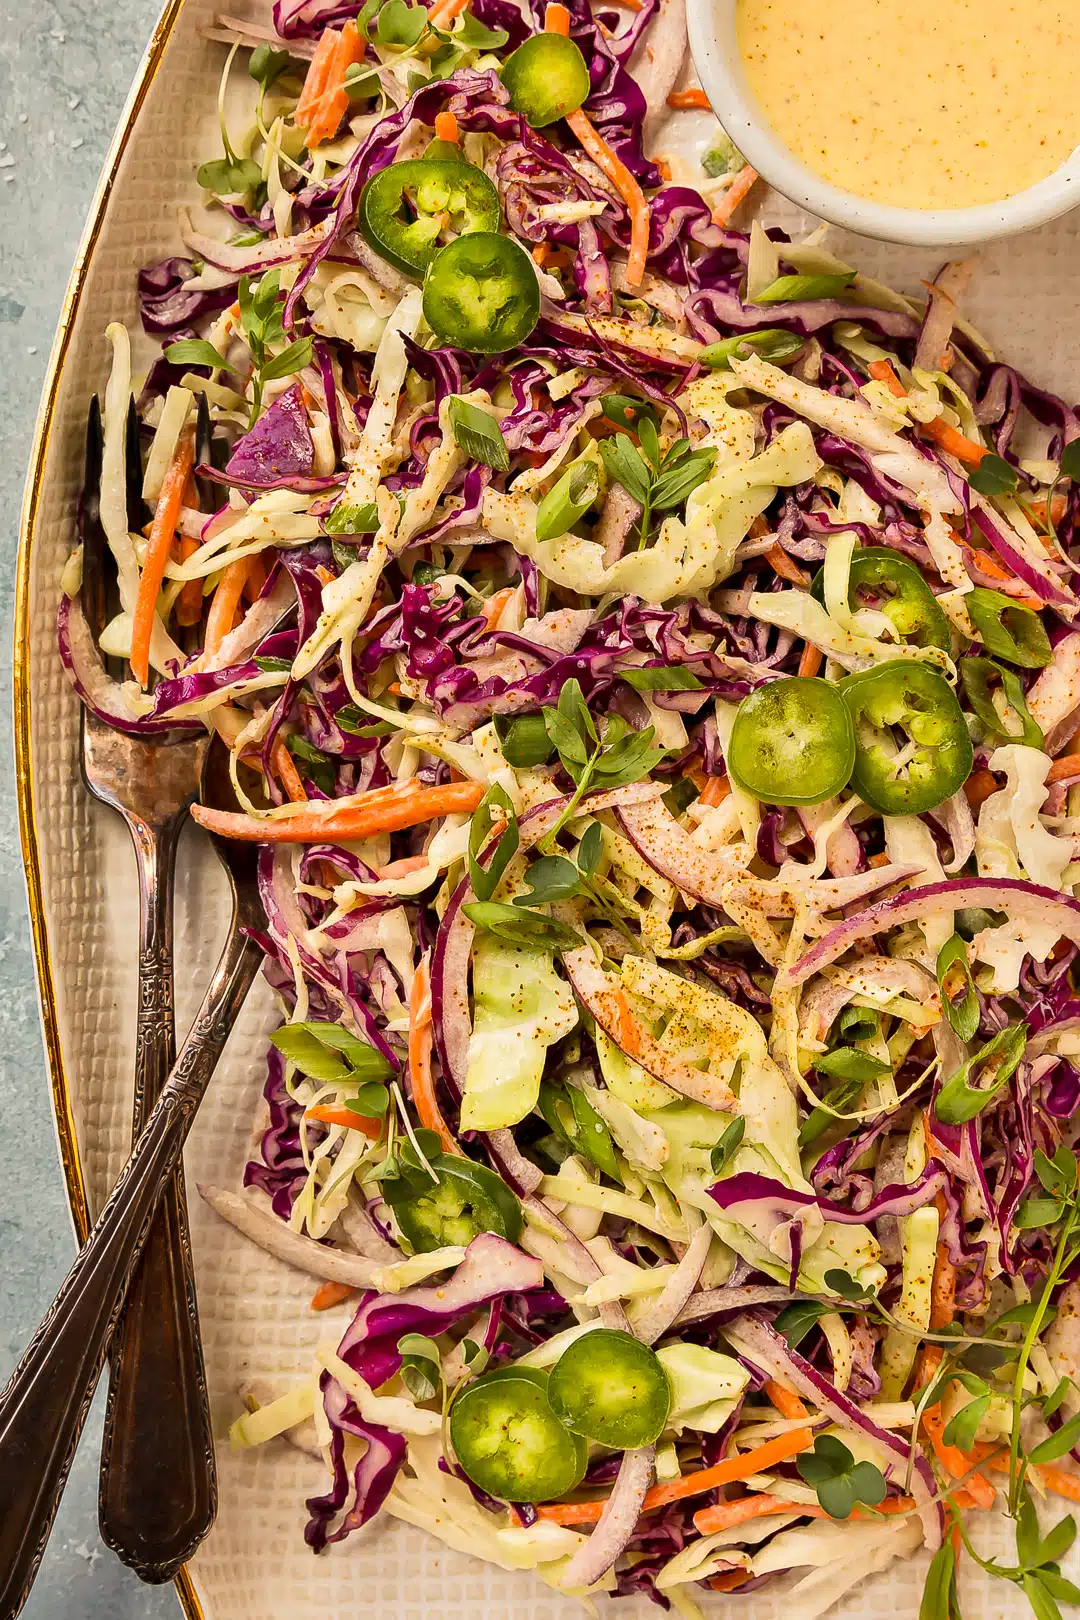 Overhead photo of jalapeno cilantro slaw with red cabbage, green cabbage, carrots, and cilantro.